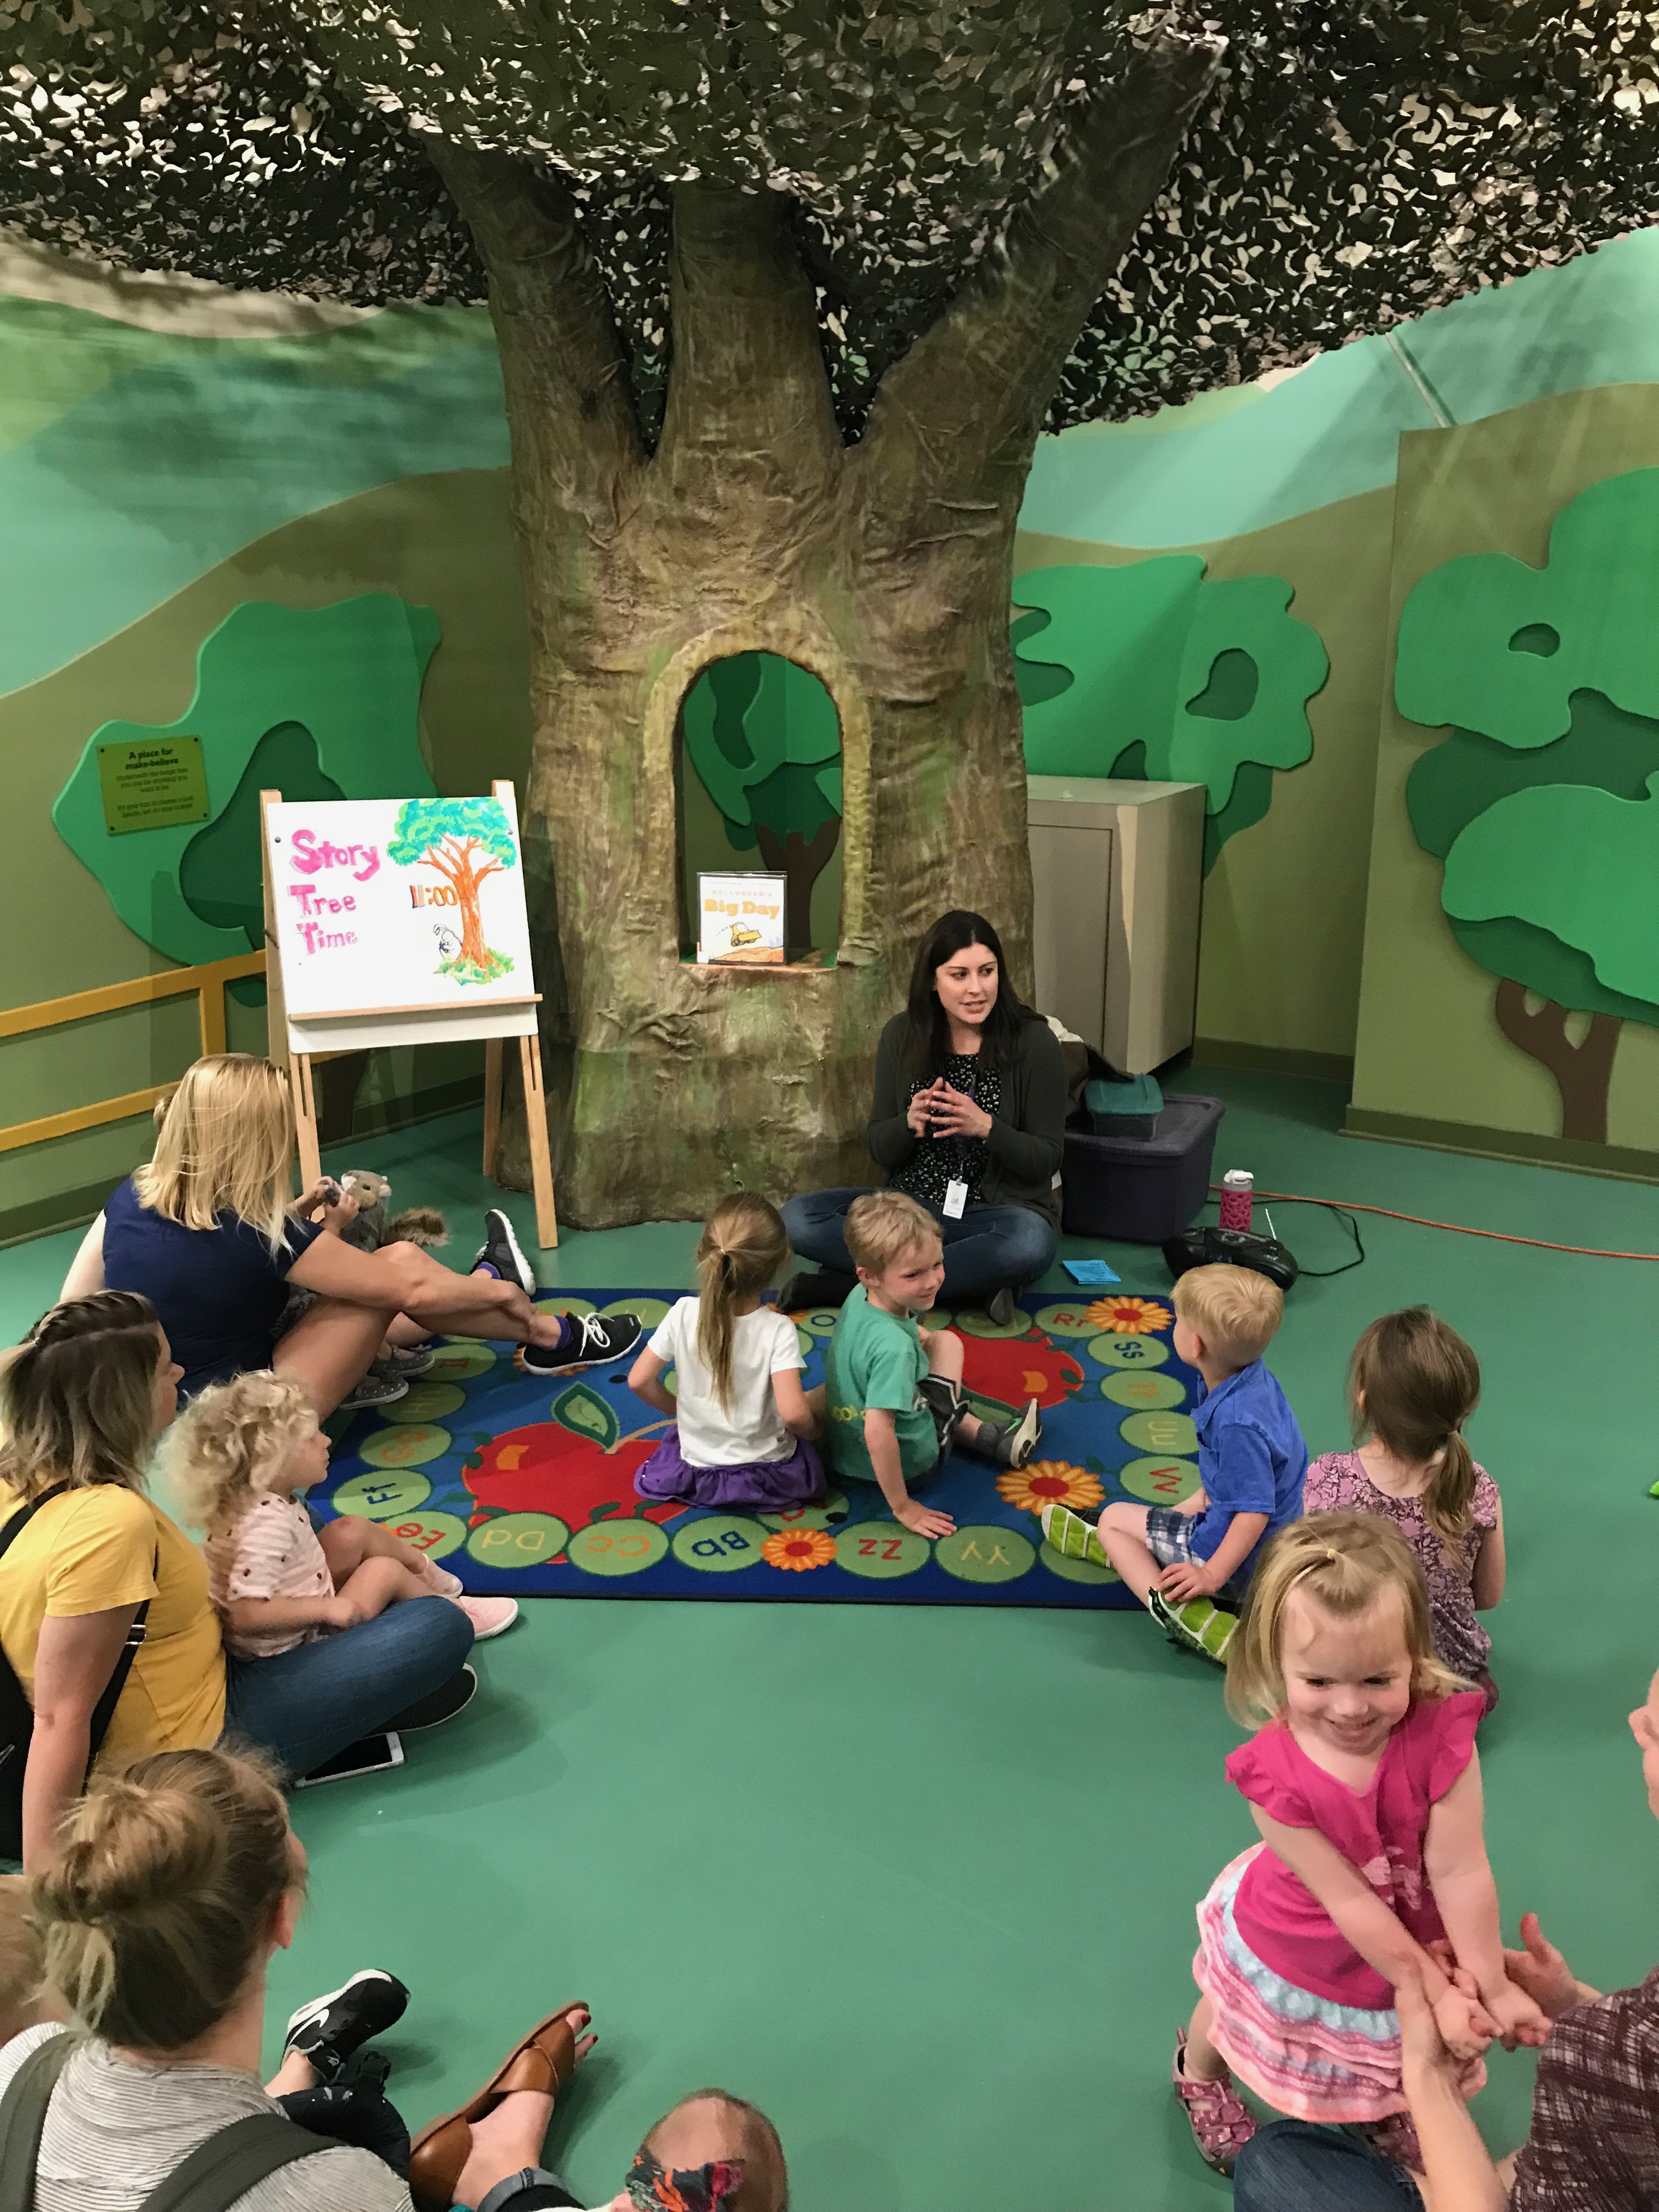 image of children during story tree time